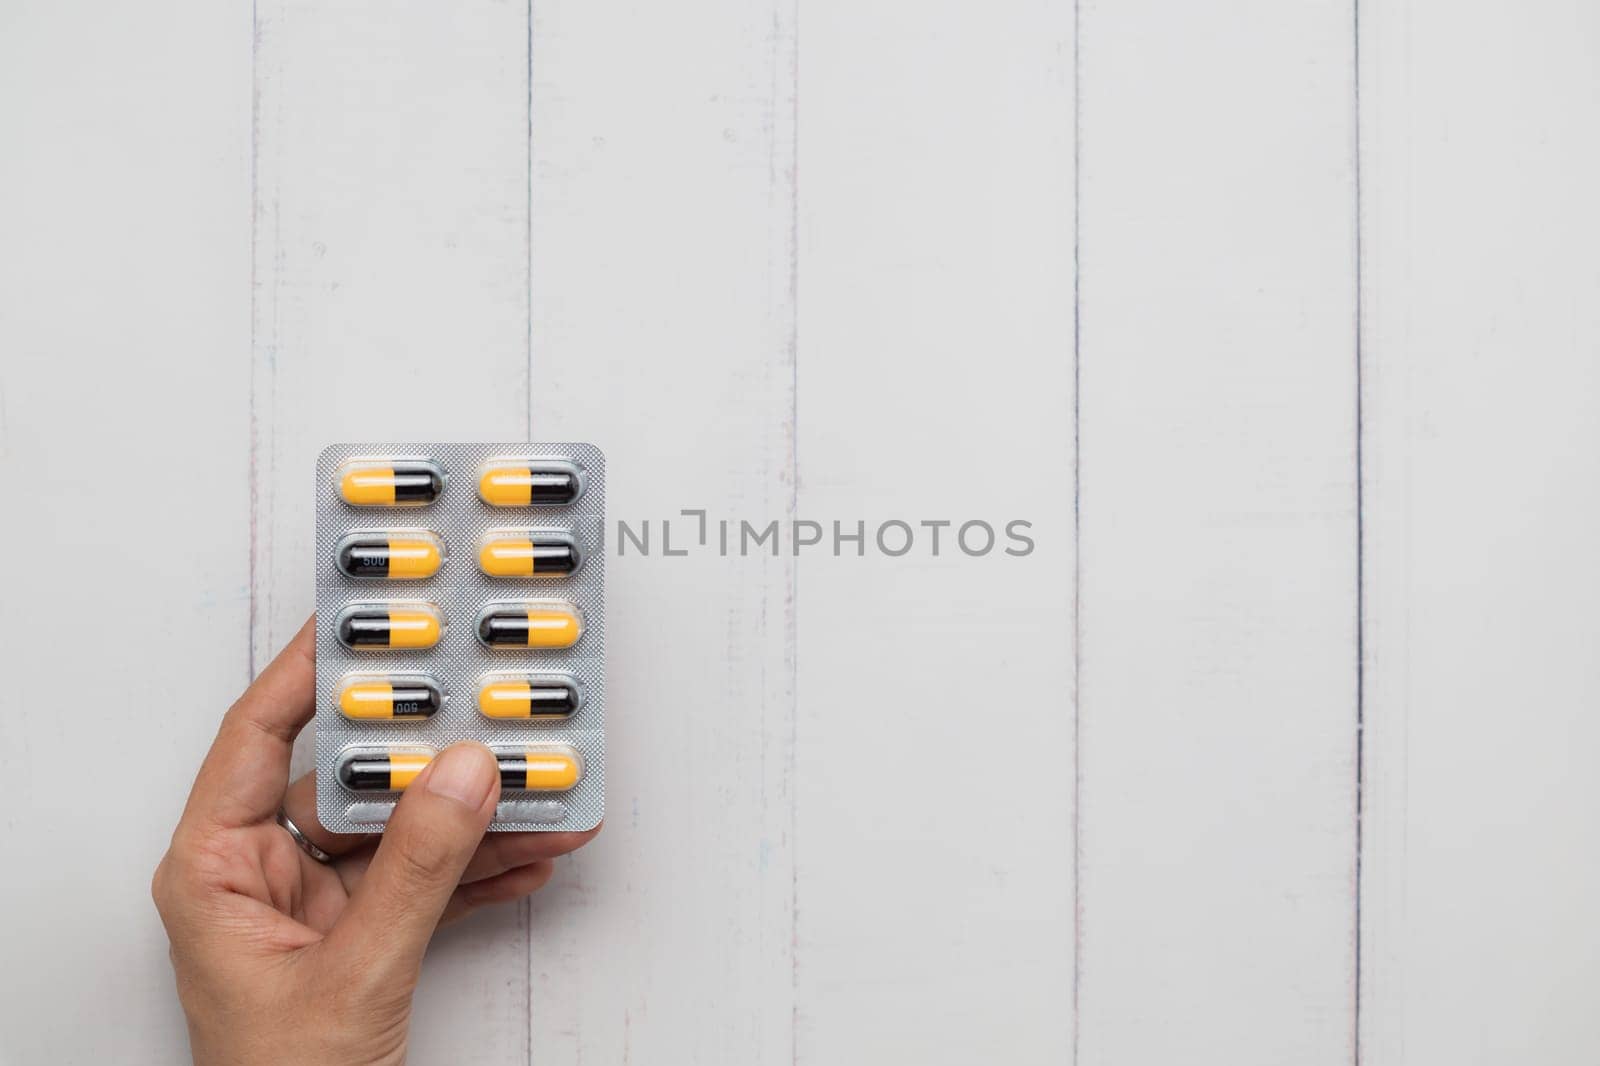 A person holding a blister pack of yellow and black capsules on a white table. It appears to be Amoxicillin, an antibiotic medication for healthcare and medical concept.